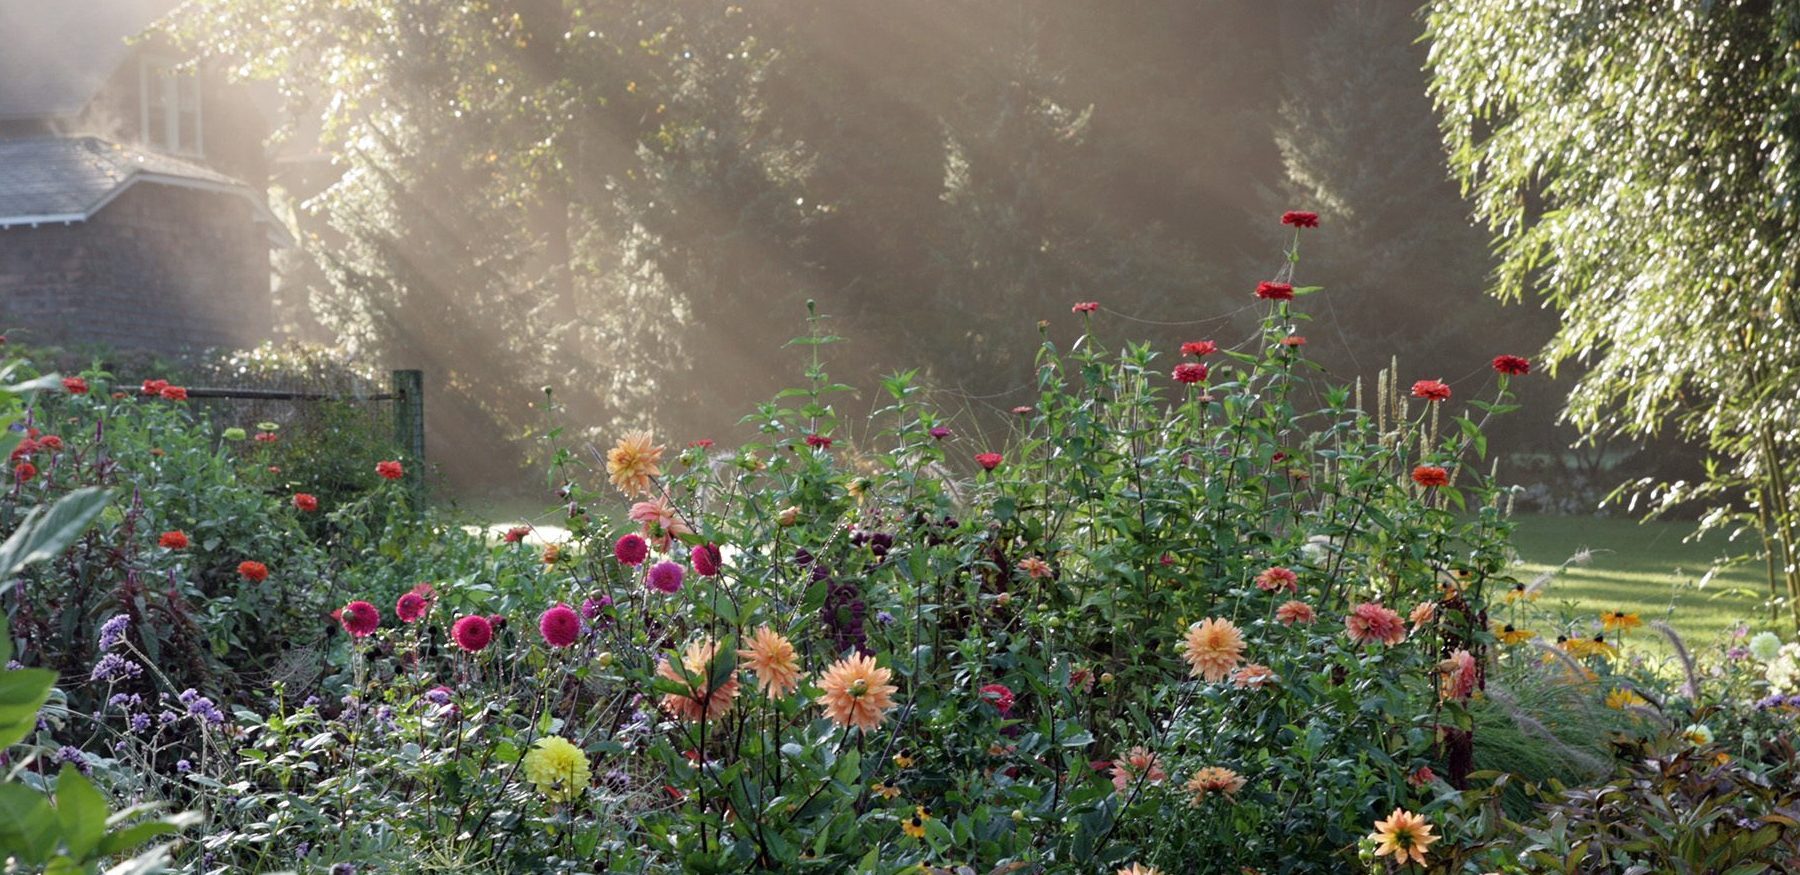 Blithewold, an American Garden Treasure ... Come, and be inspired